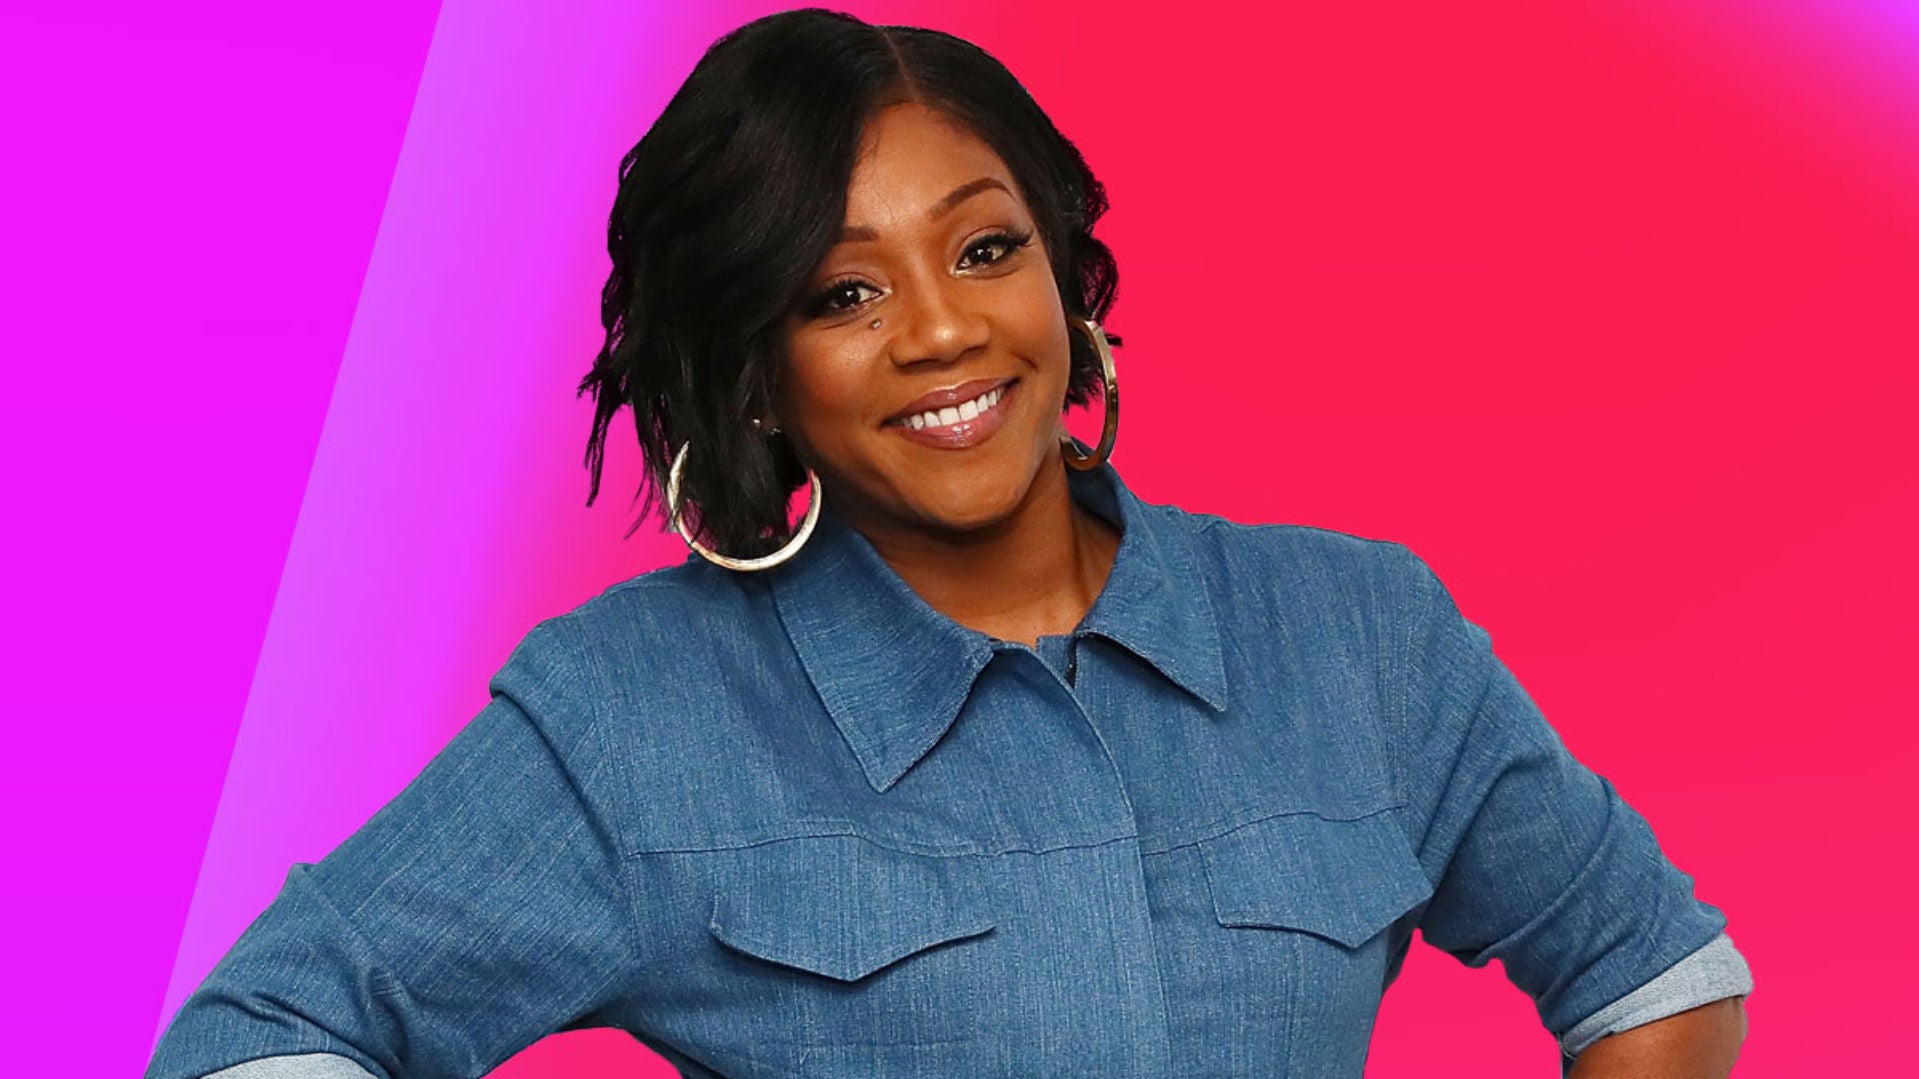 Tiffany Haddish Breaks Silence After Bombing Stand-Up Comedy Set: 'I Wish It Was Better'